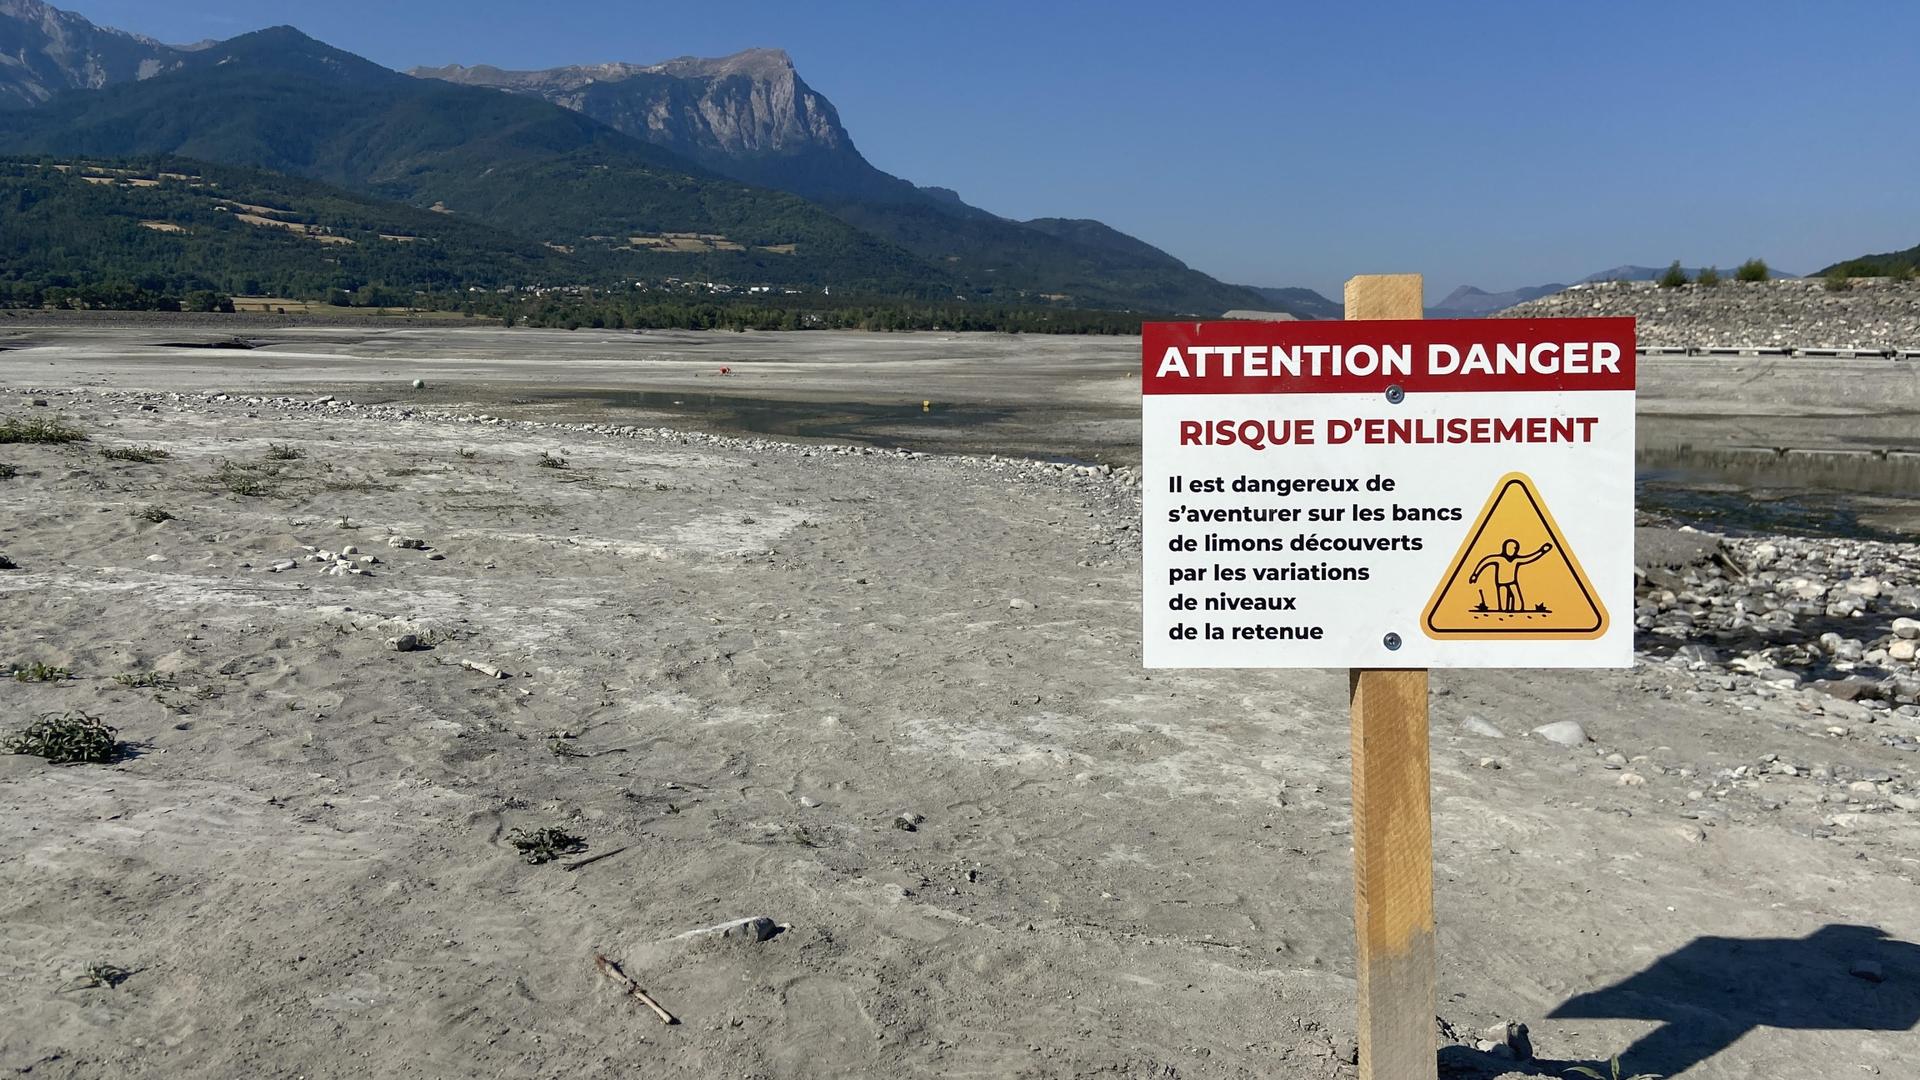 A quicksand warning where water once ran. France’s Durance River, which cuts through the Hautes Alpes on its way south, has receded dramatically exposing tourists to new, dangerous terrain.